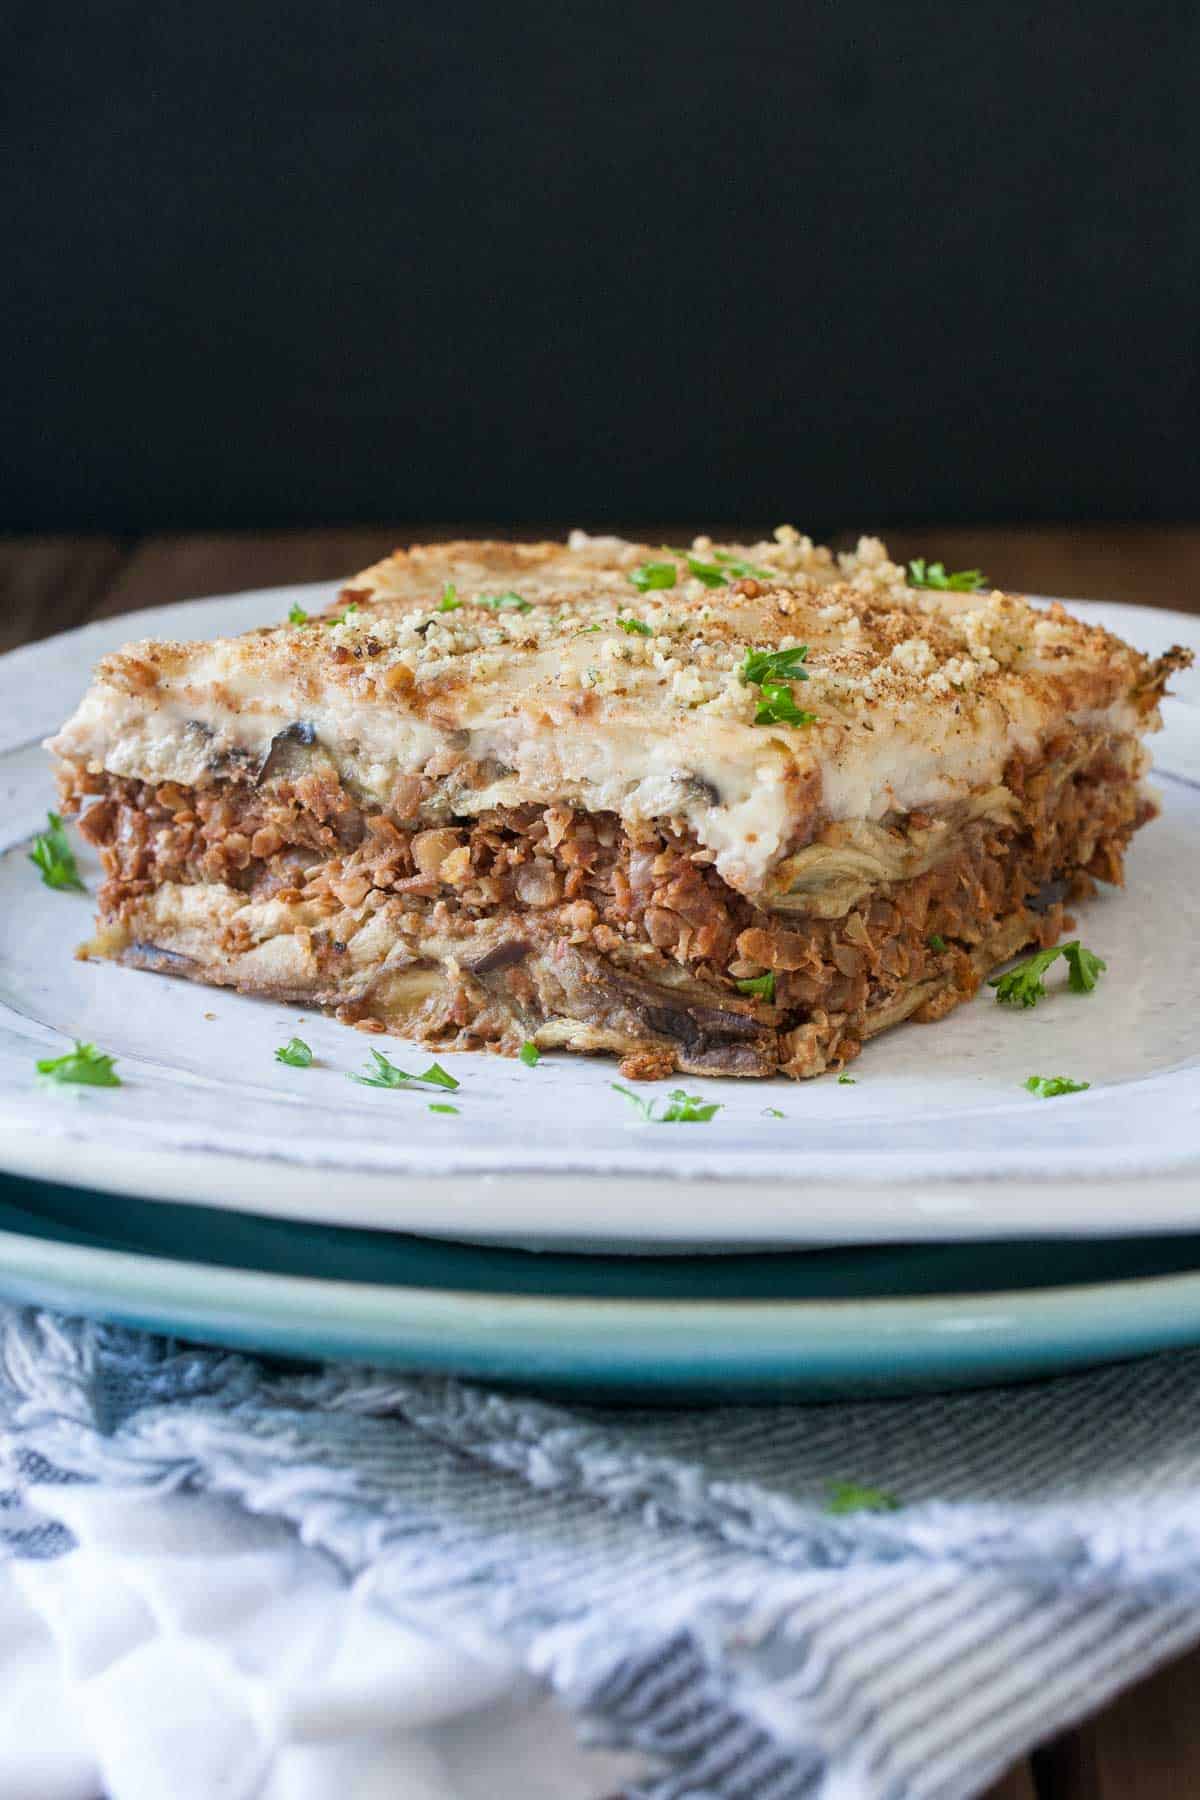 White plate on top of a blue plate with a slice of lentil based moussaka on it